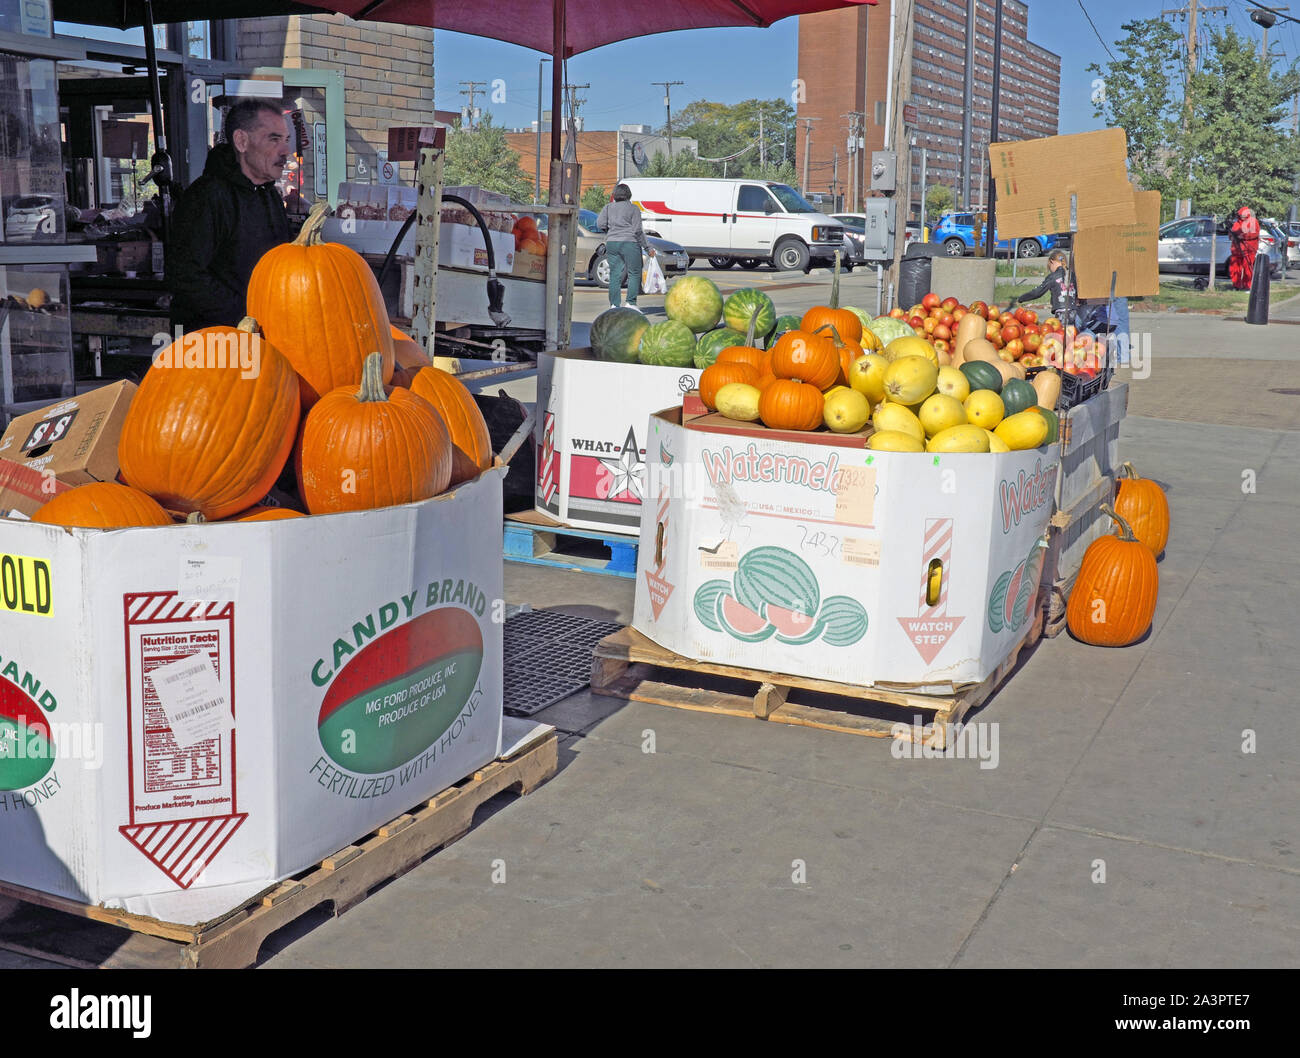 Pumpkins, squash, apples, and watermelons for sale outside the West Side Market in Ohio City in Cleveland, Ohio during the fall autumn season. Stock Photo